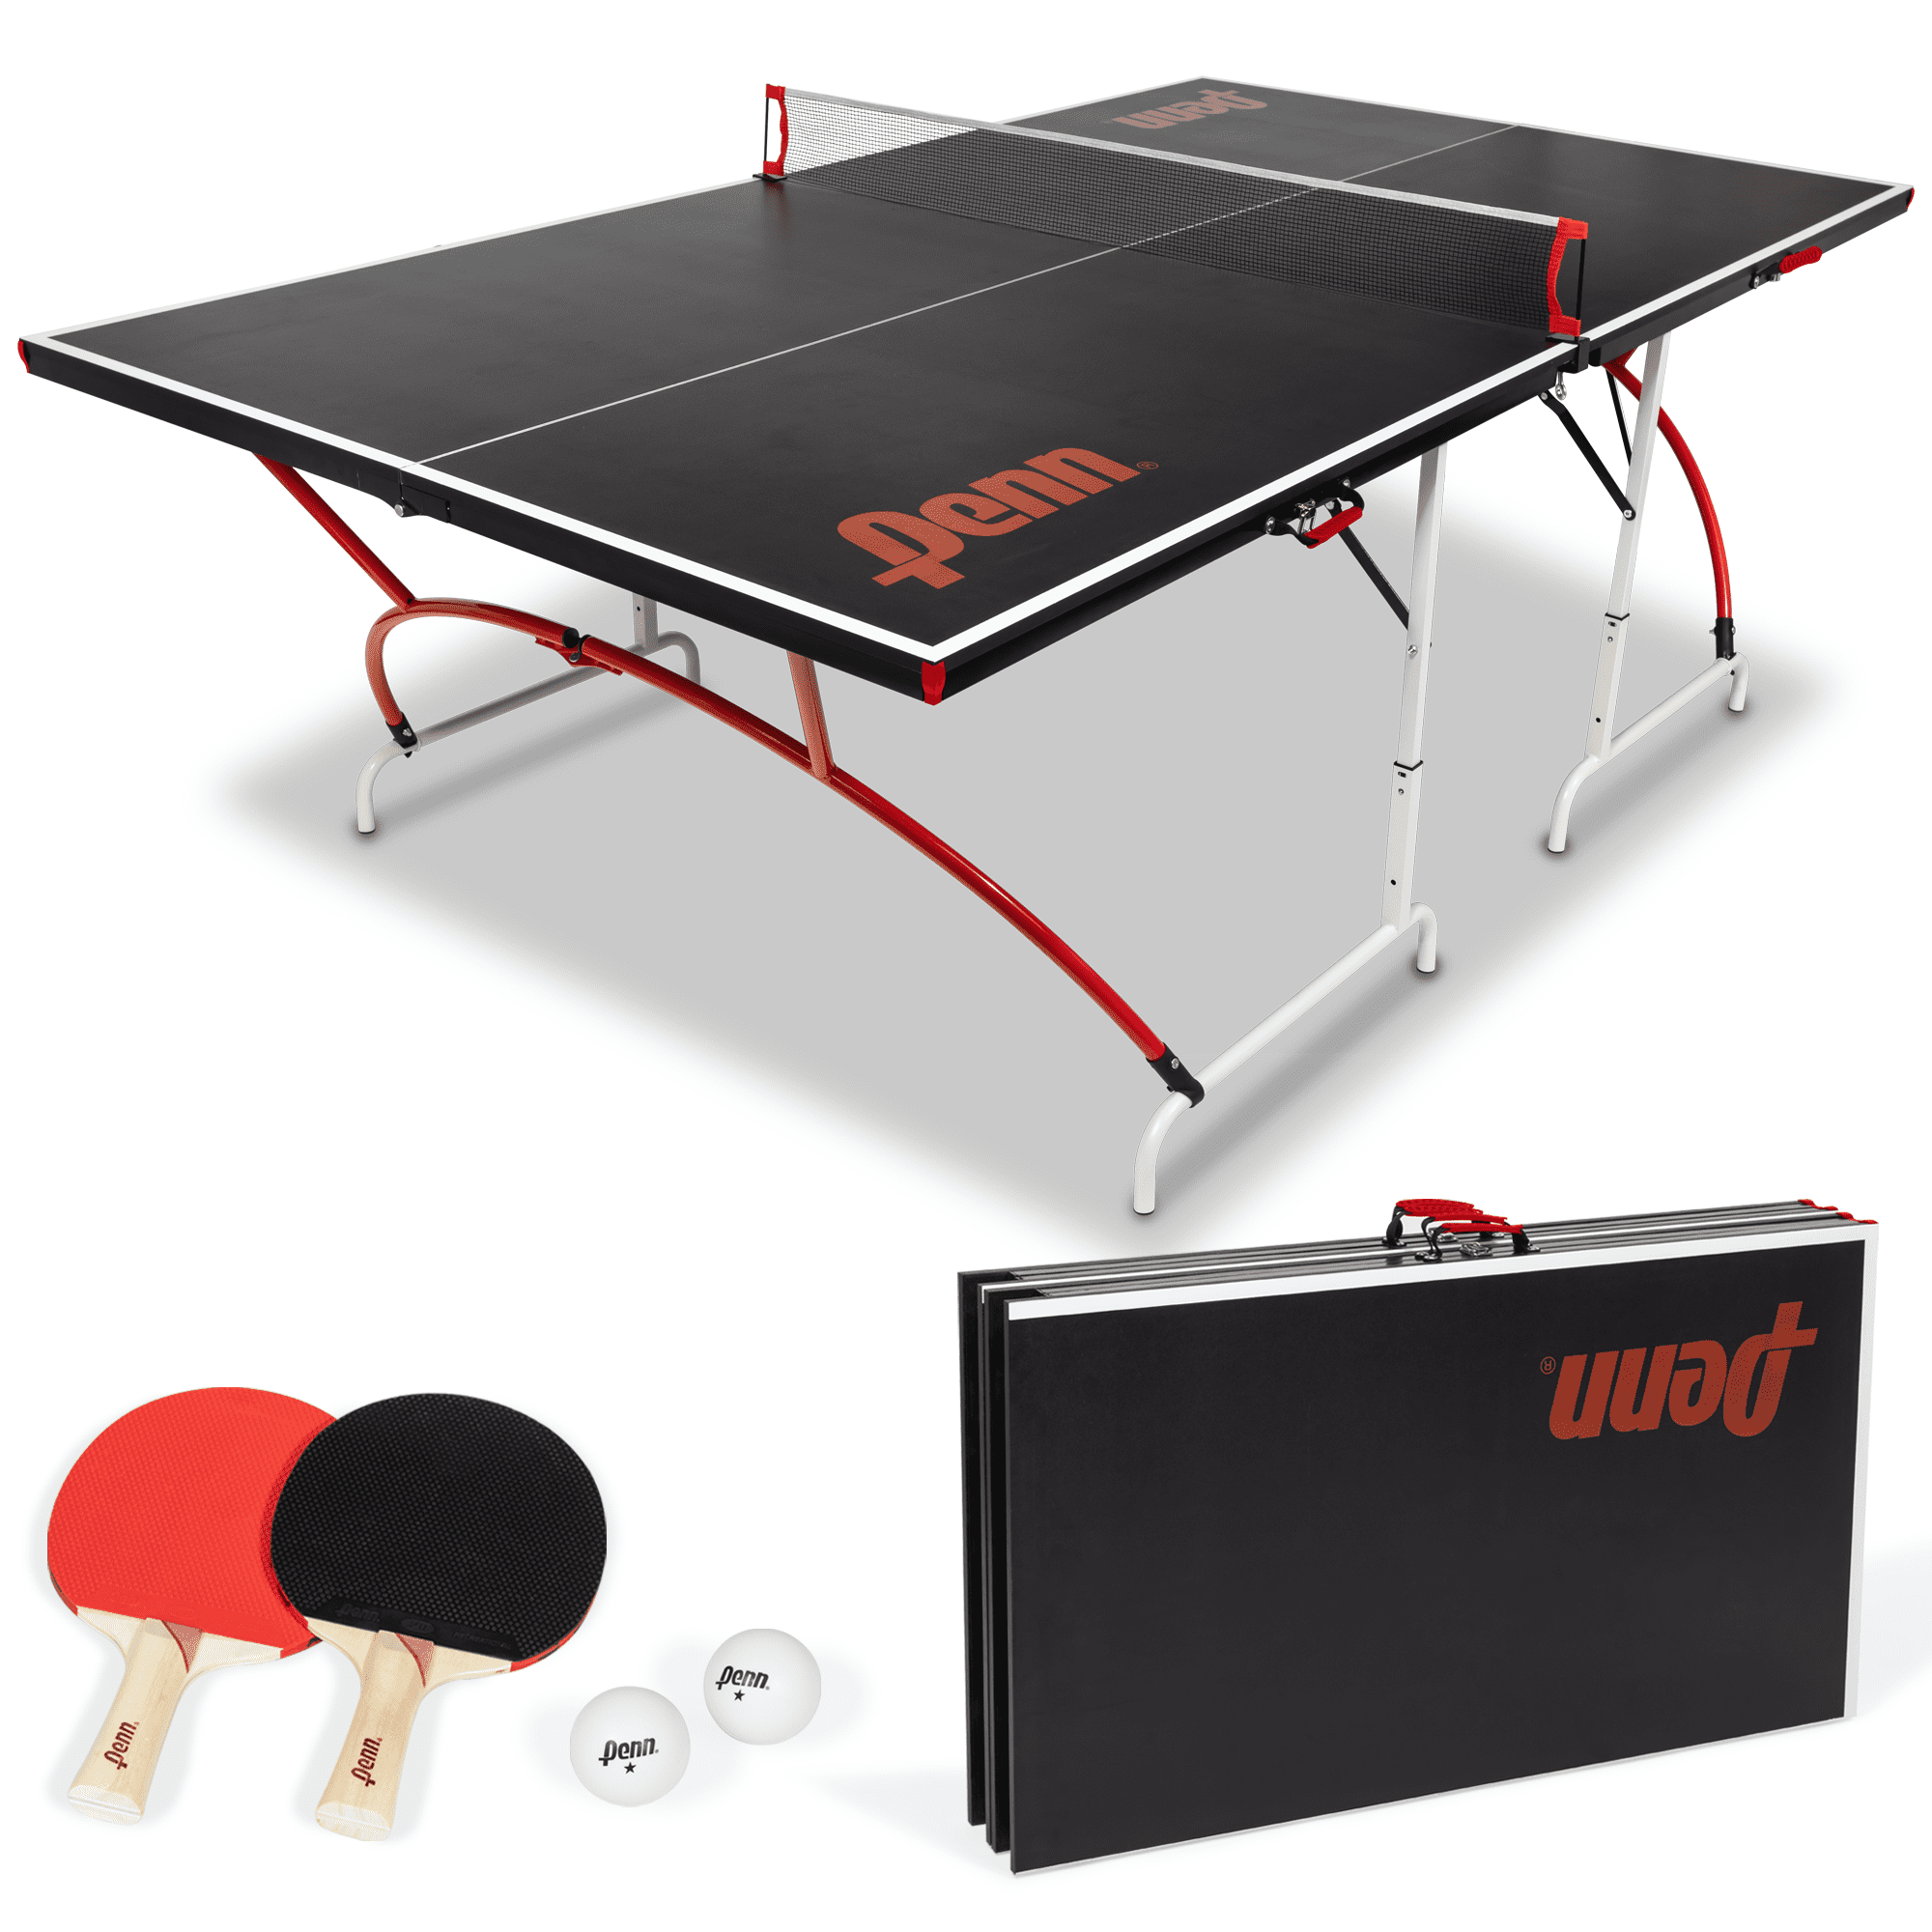 Penn Easy Setup Mid Size 15mm Table Tennis Table, Sets up in Minutes - Perfect for Game Room, Playroom, Basement, Garage or Man Cave